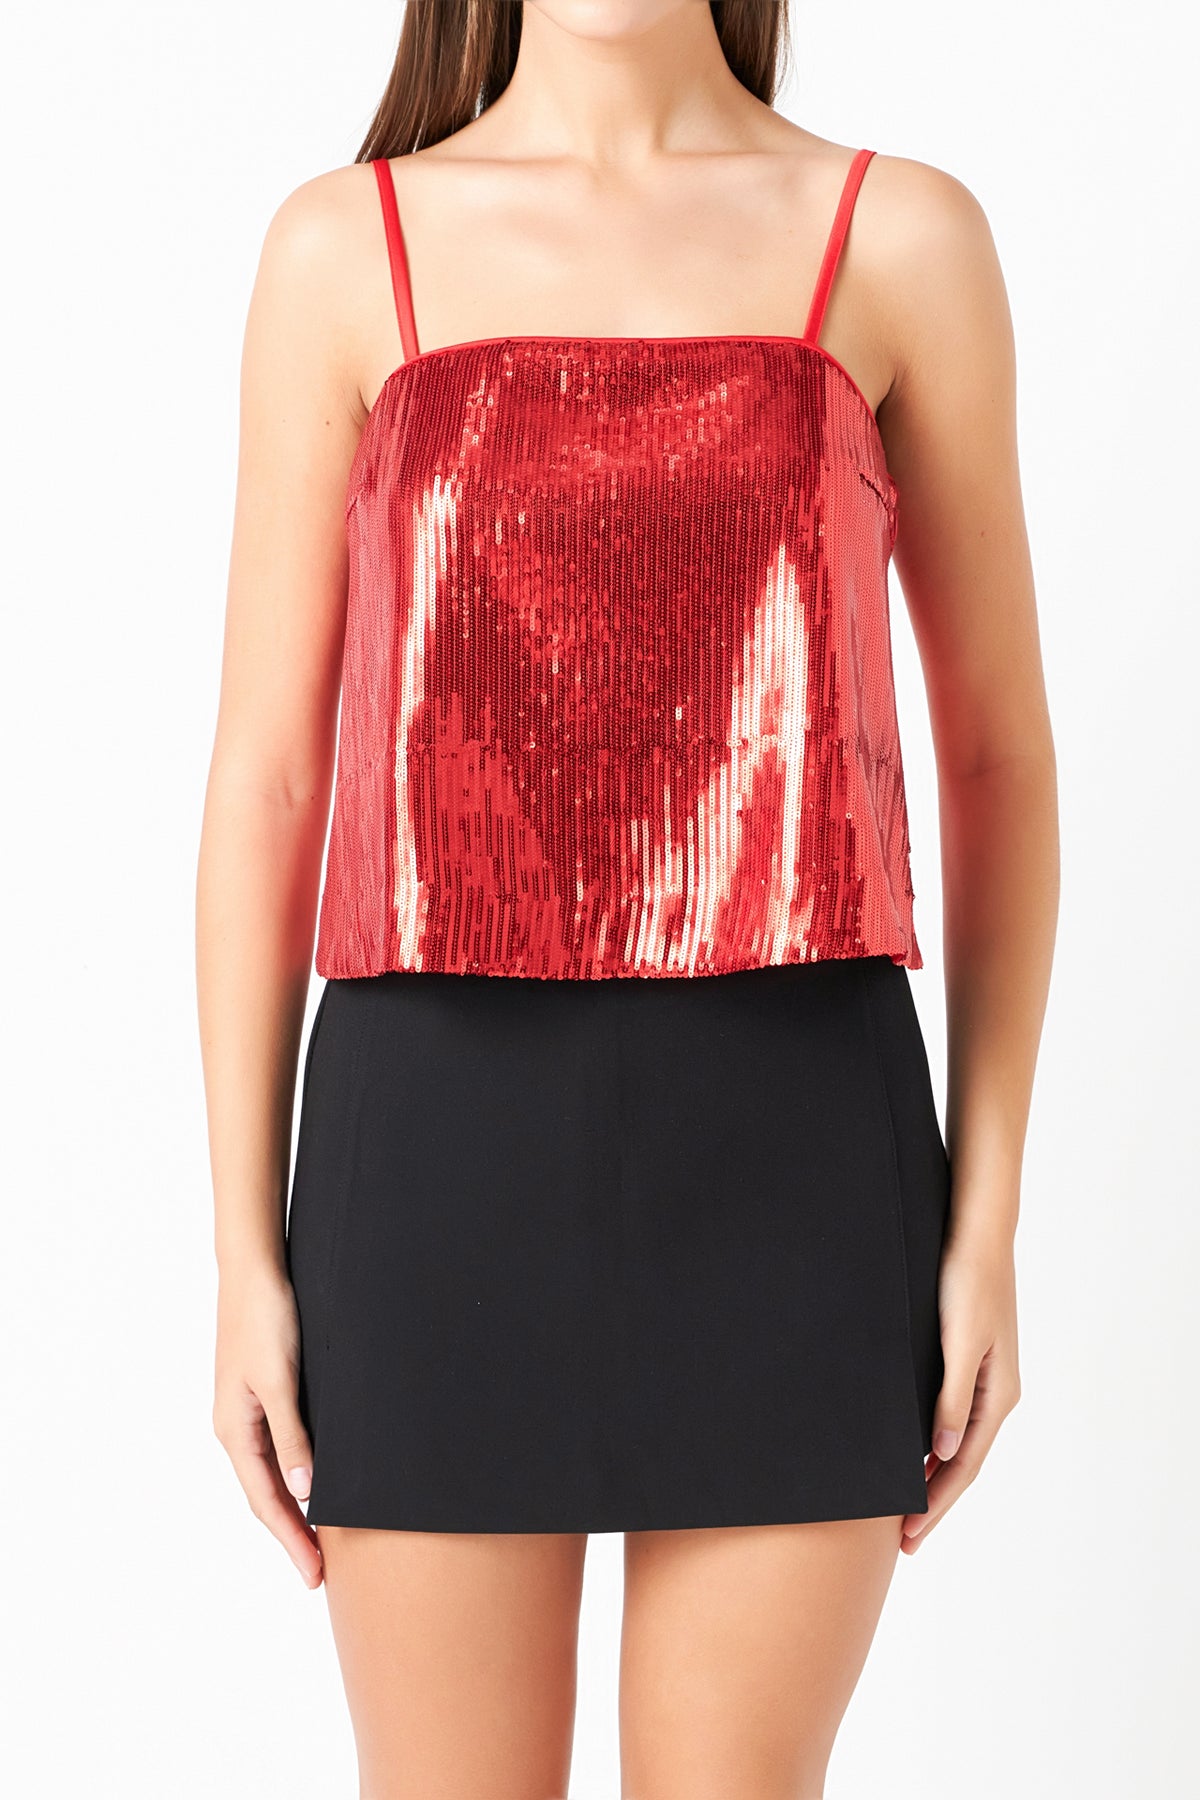 ENDLESS ROSE - Sequins Top - TOPS available at Objectrare